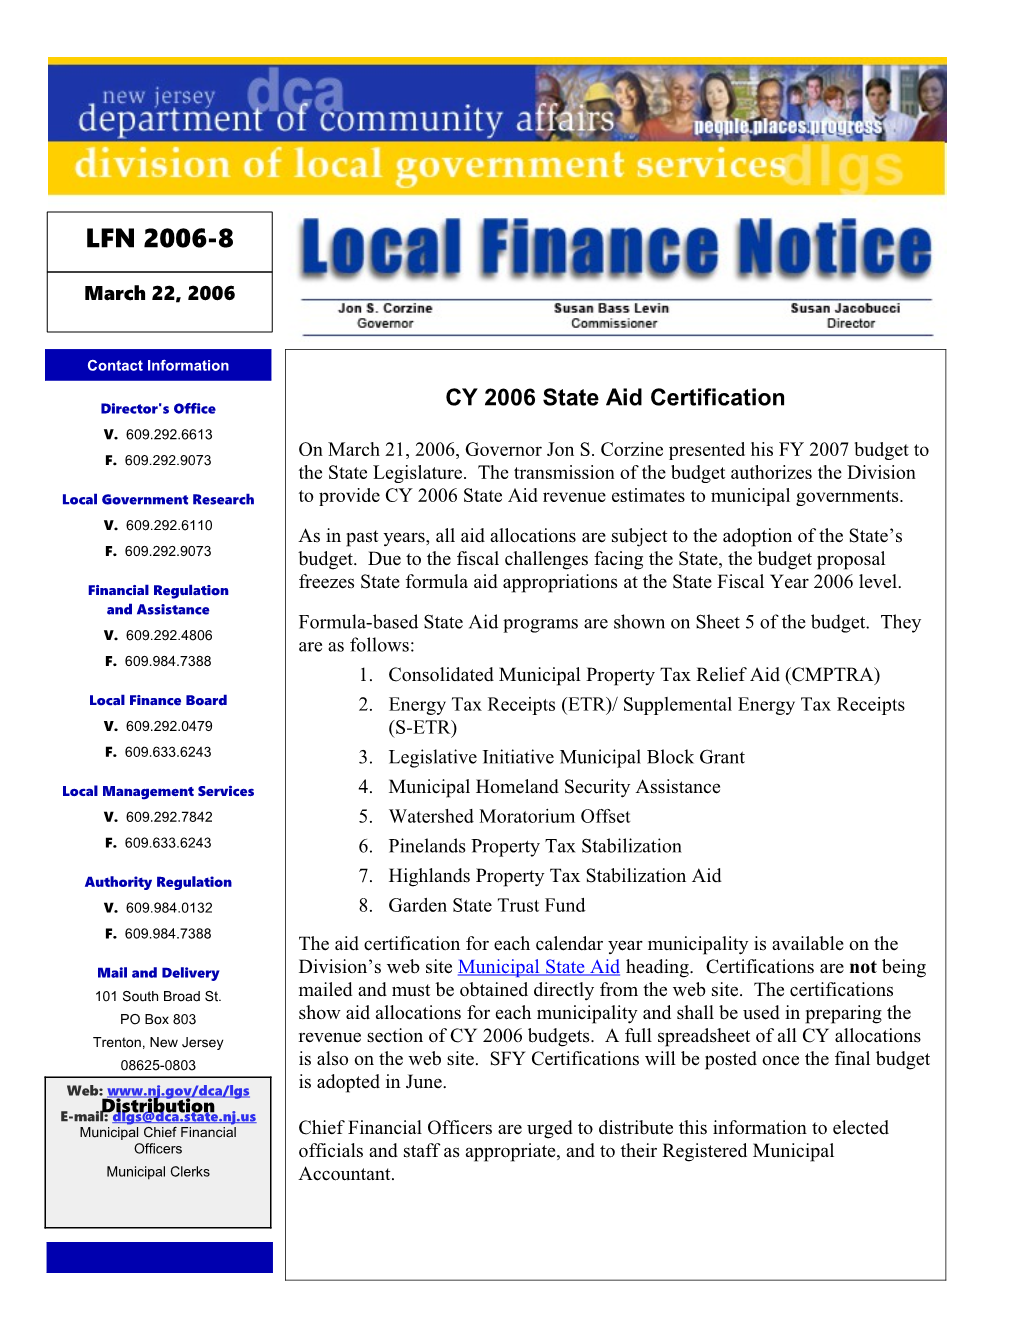 Local Finance Notice 2006-8March 22, 2006Page 1